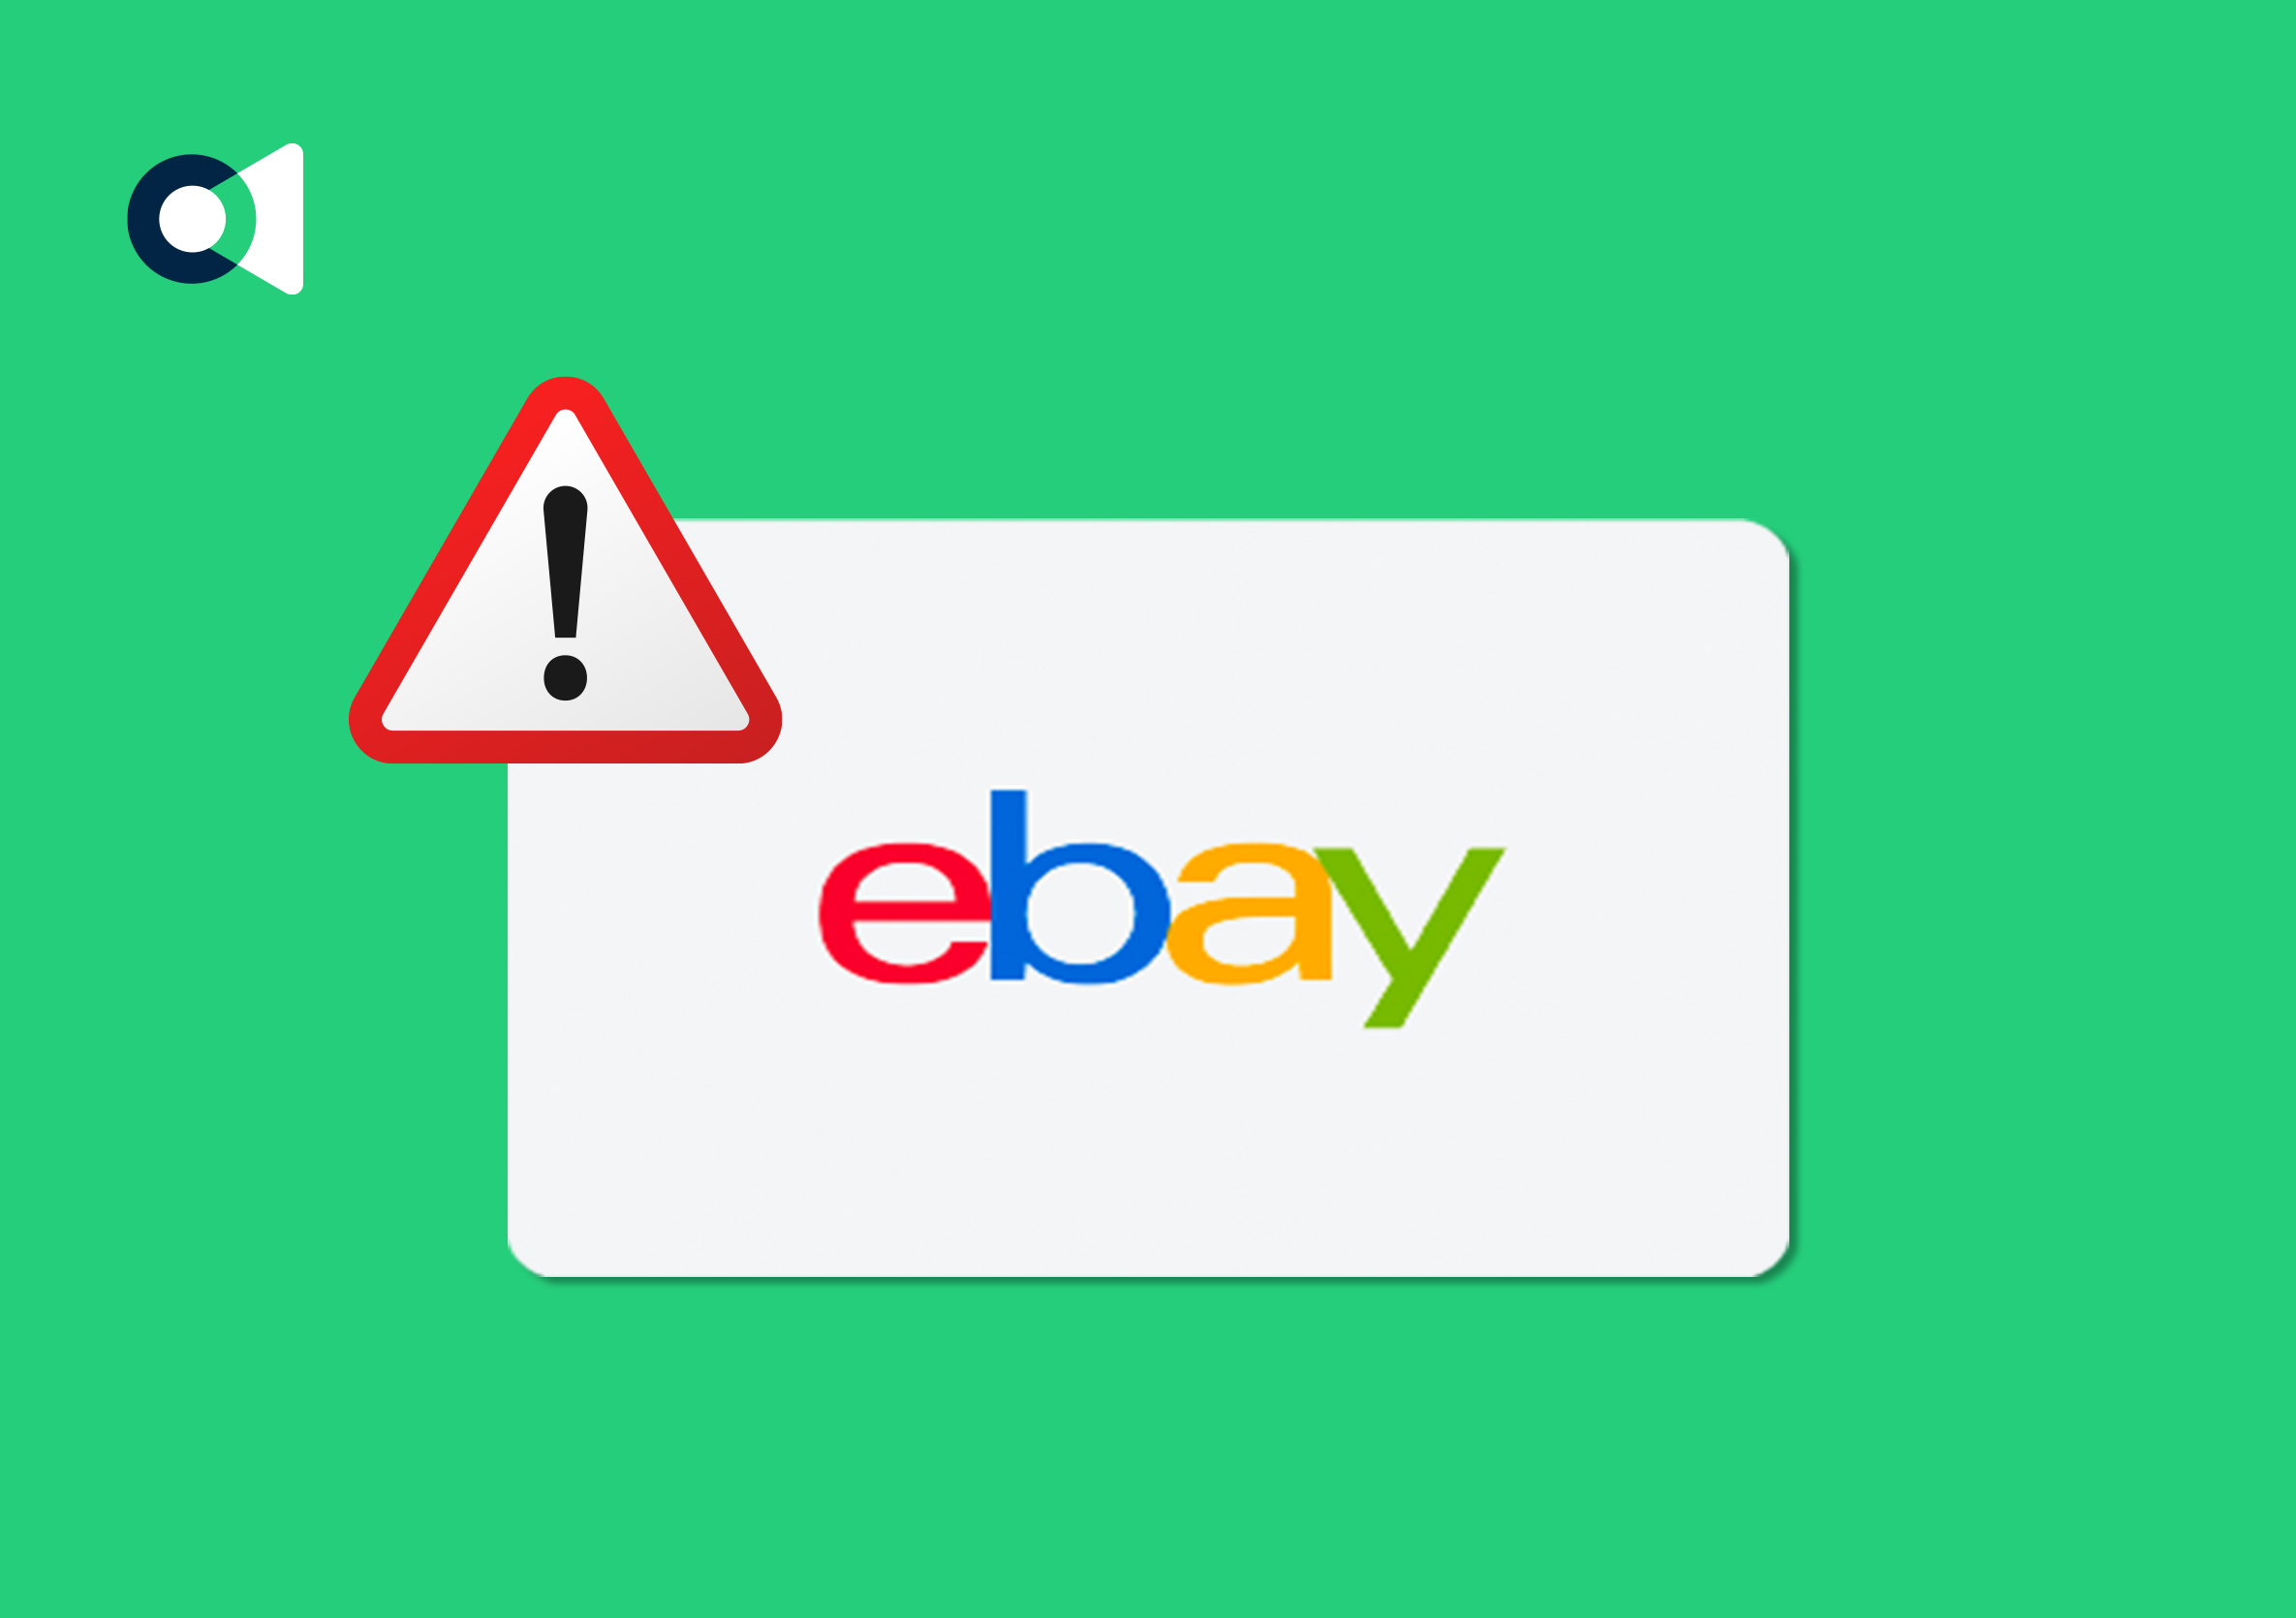 How to Avoid eBay Gift Card Scams and Protect Your Money